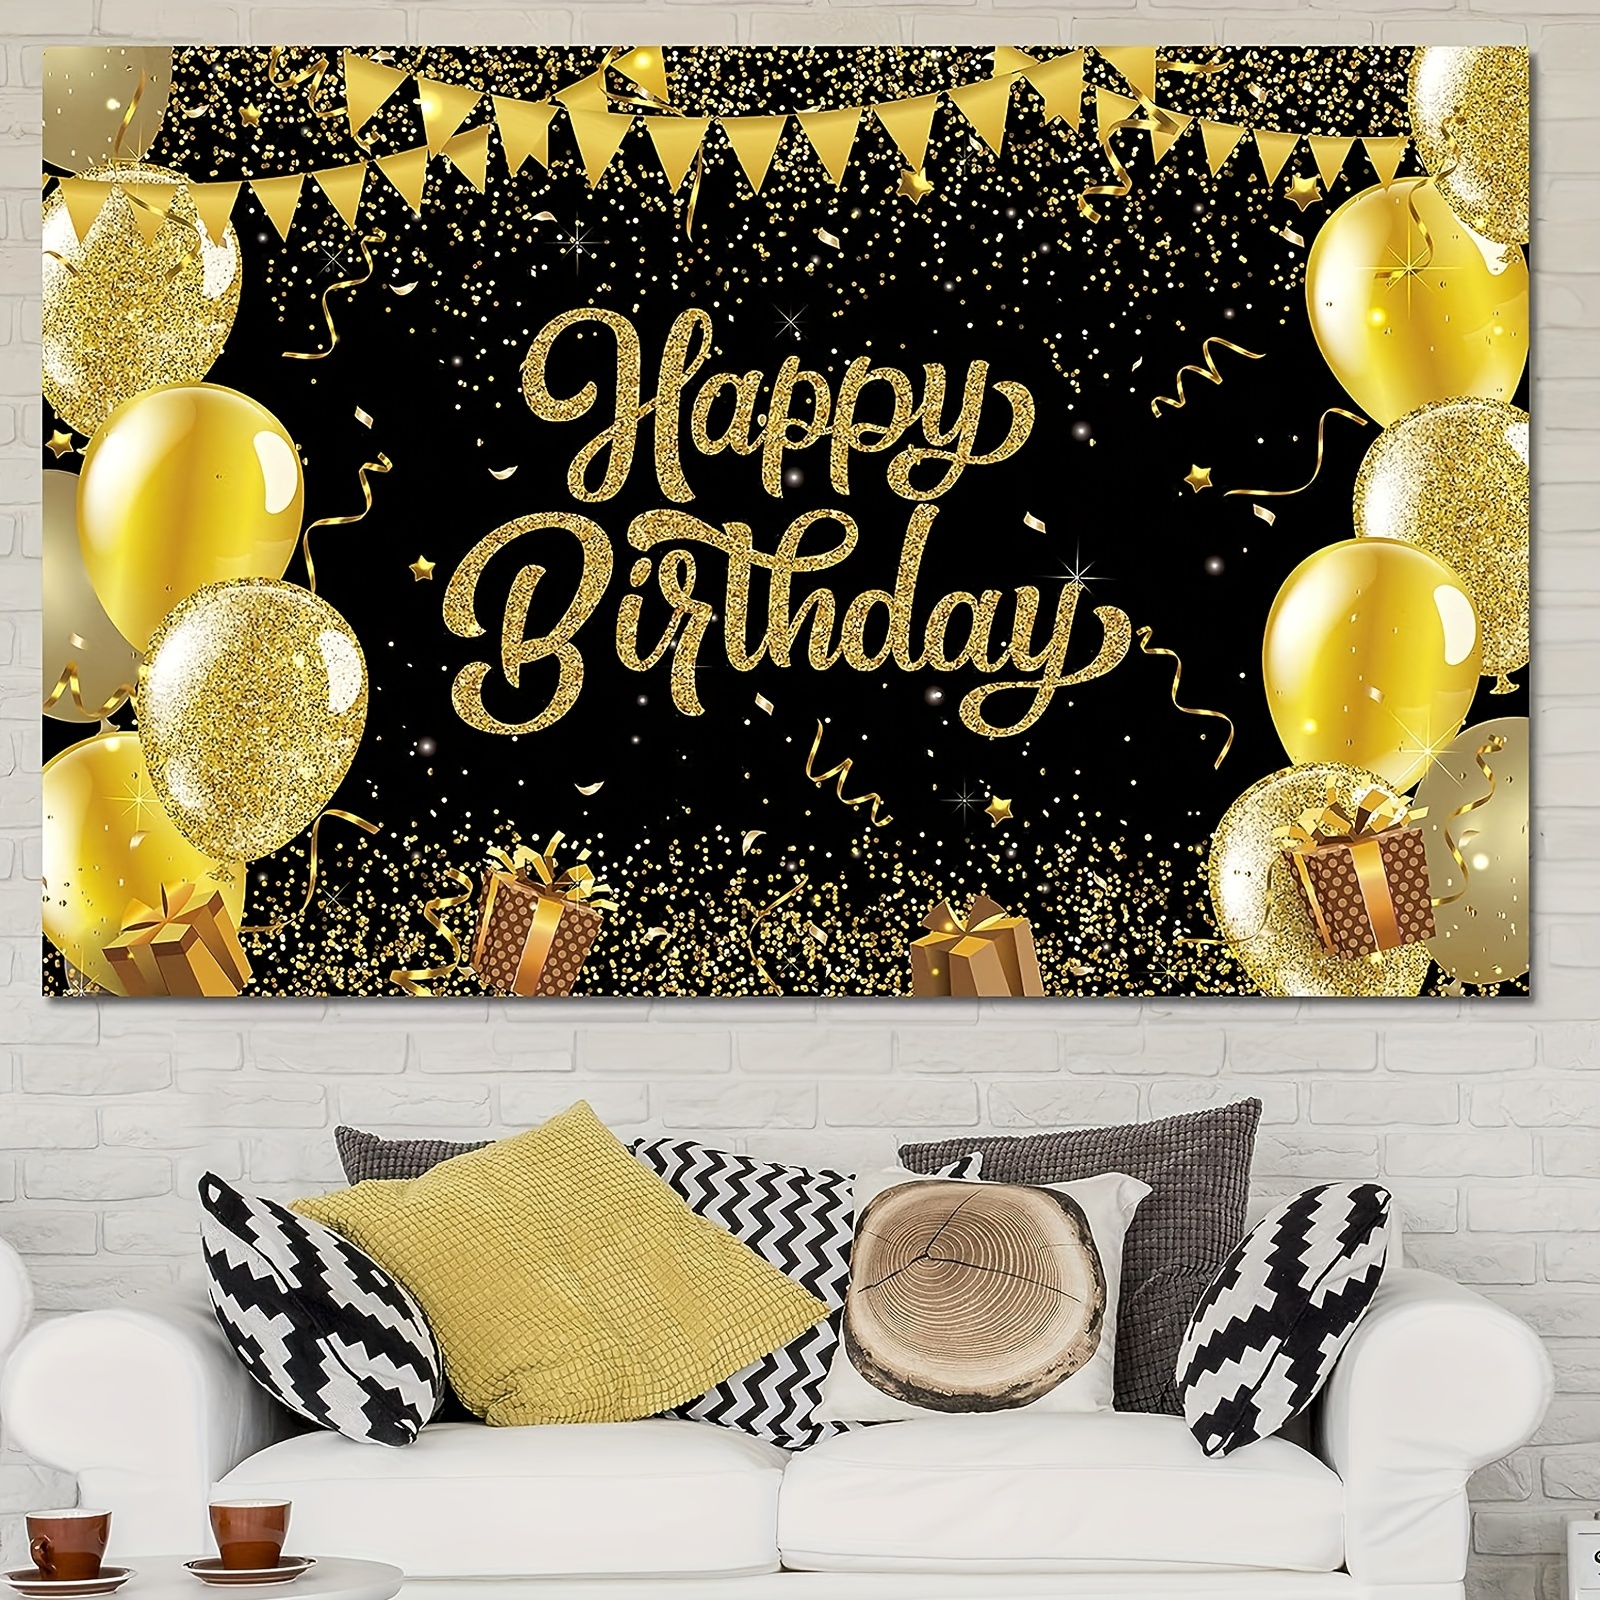 Happy Birthday Decorations for Men, 99pcs Gold and Black Party